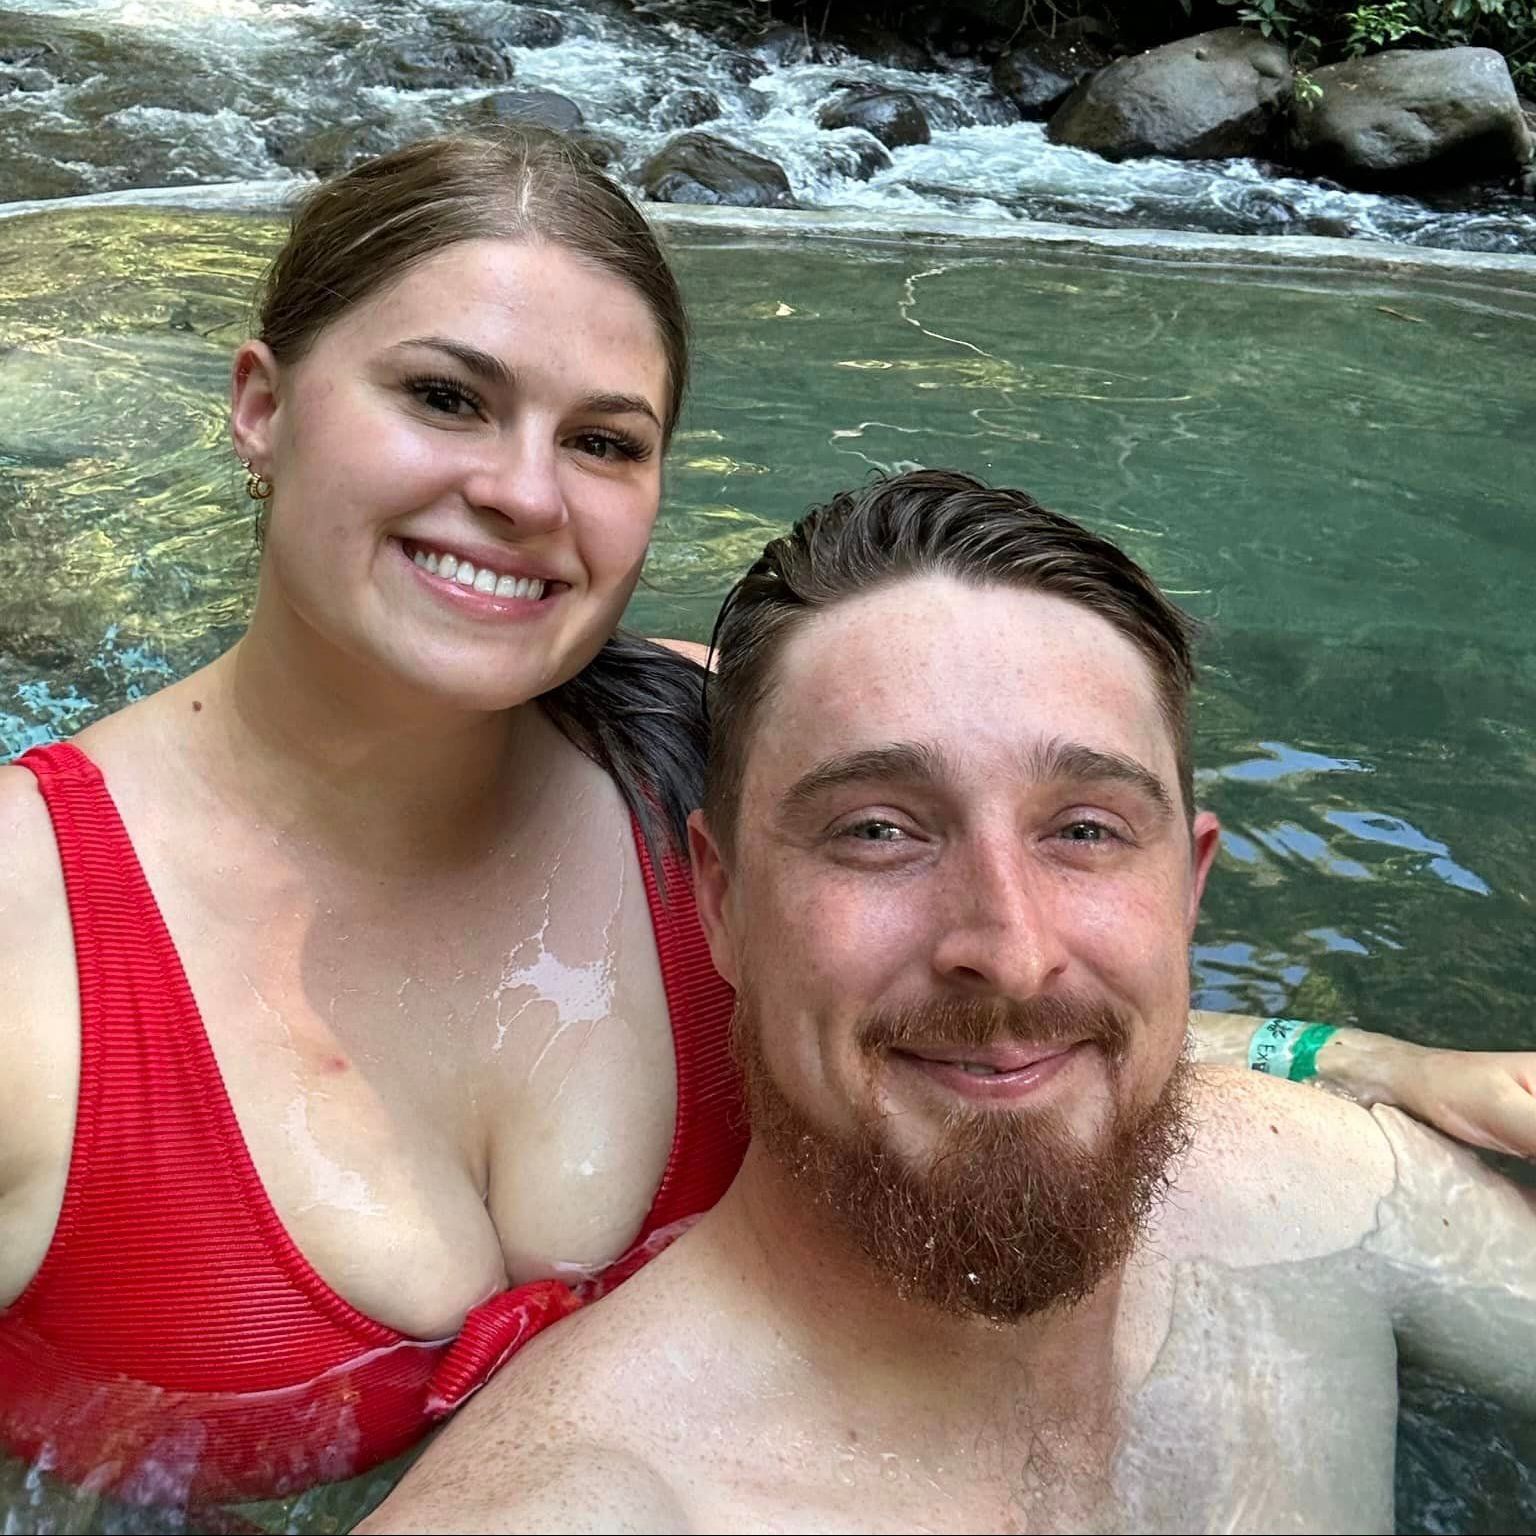 A man and a woman are taking a selfie in a pool.